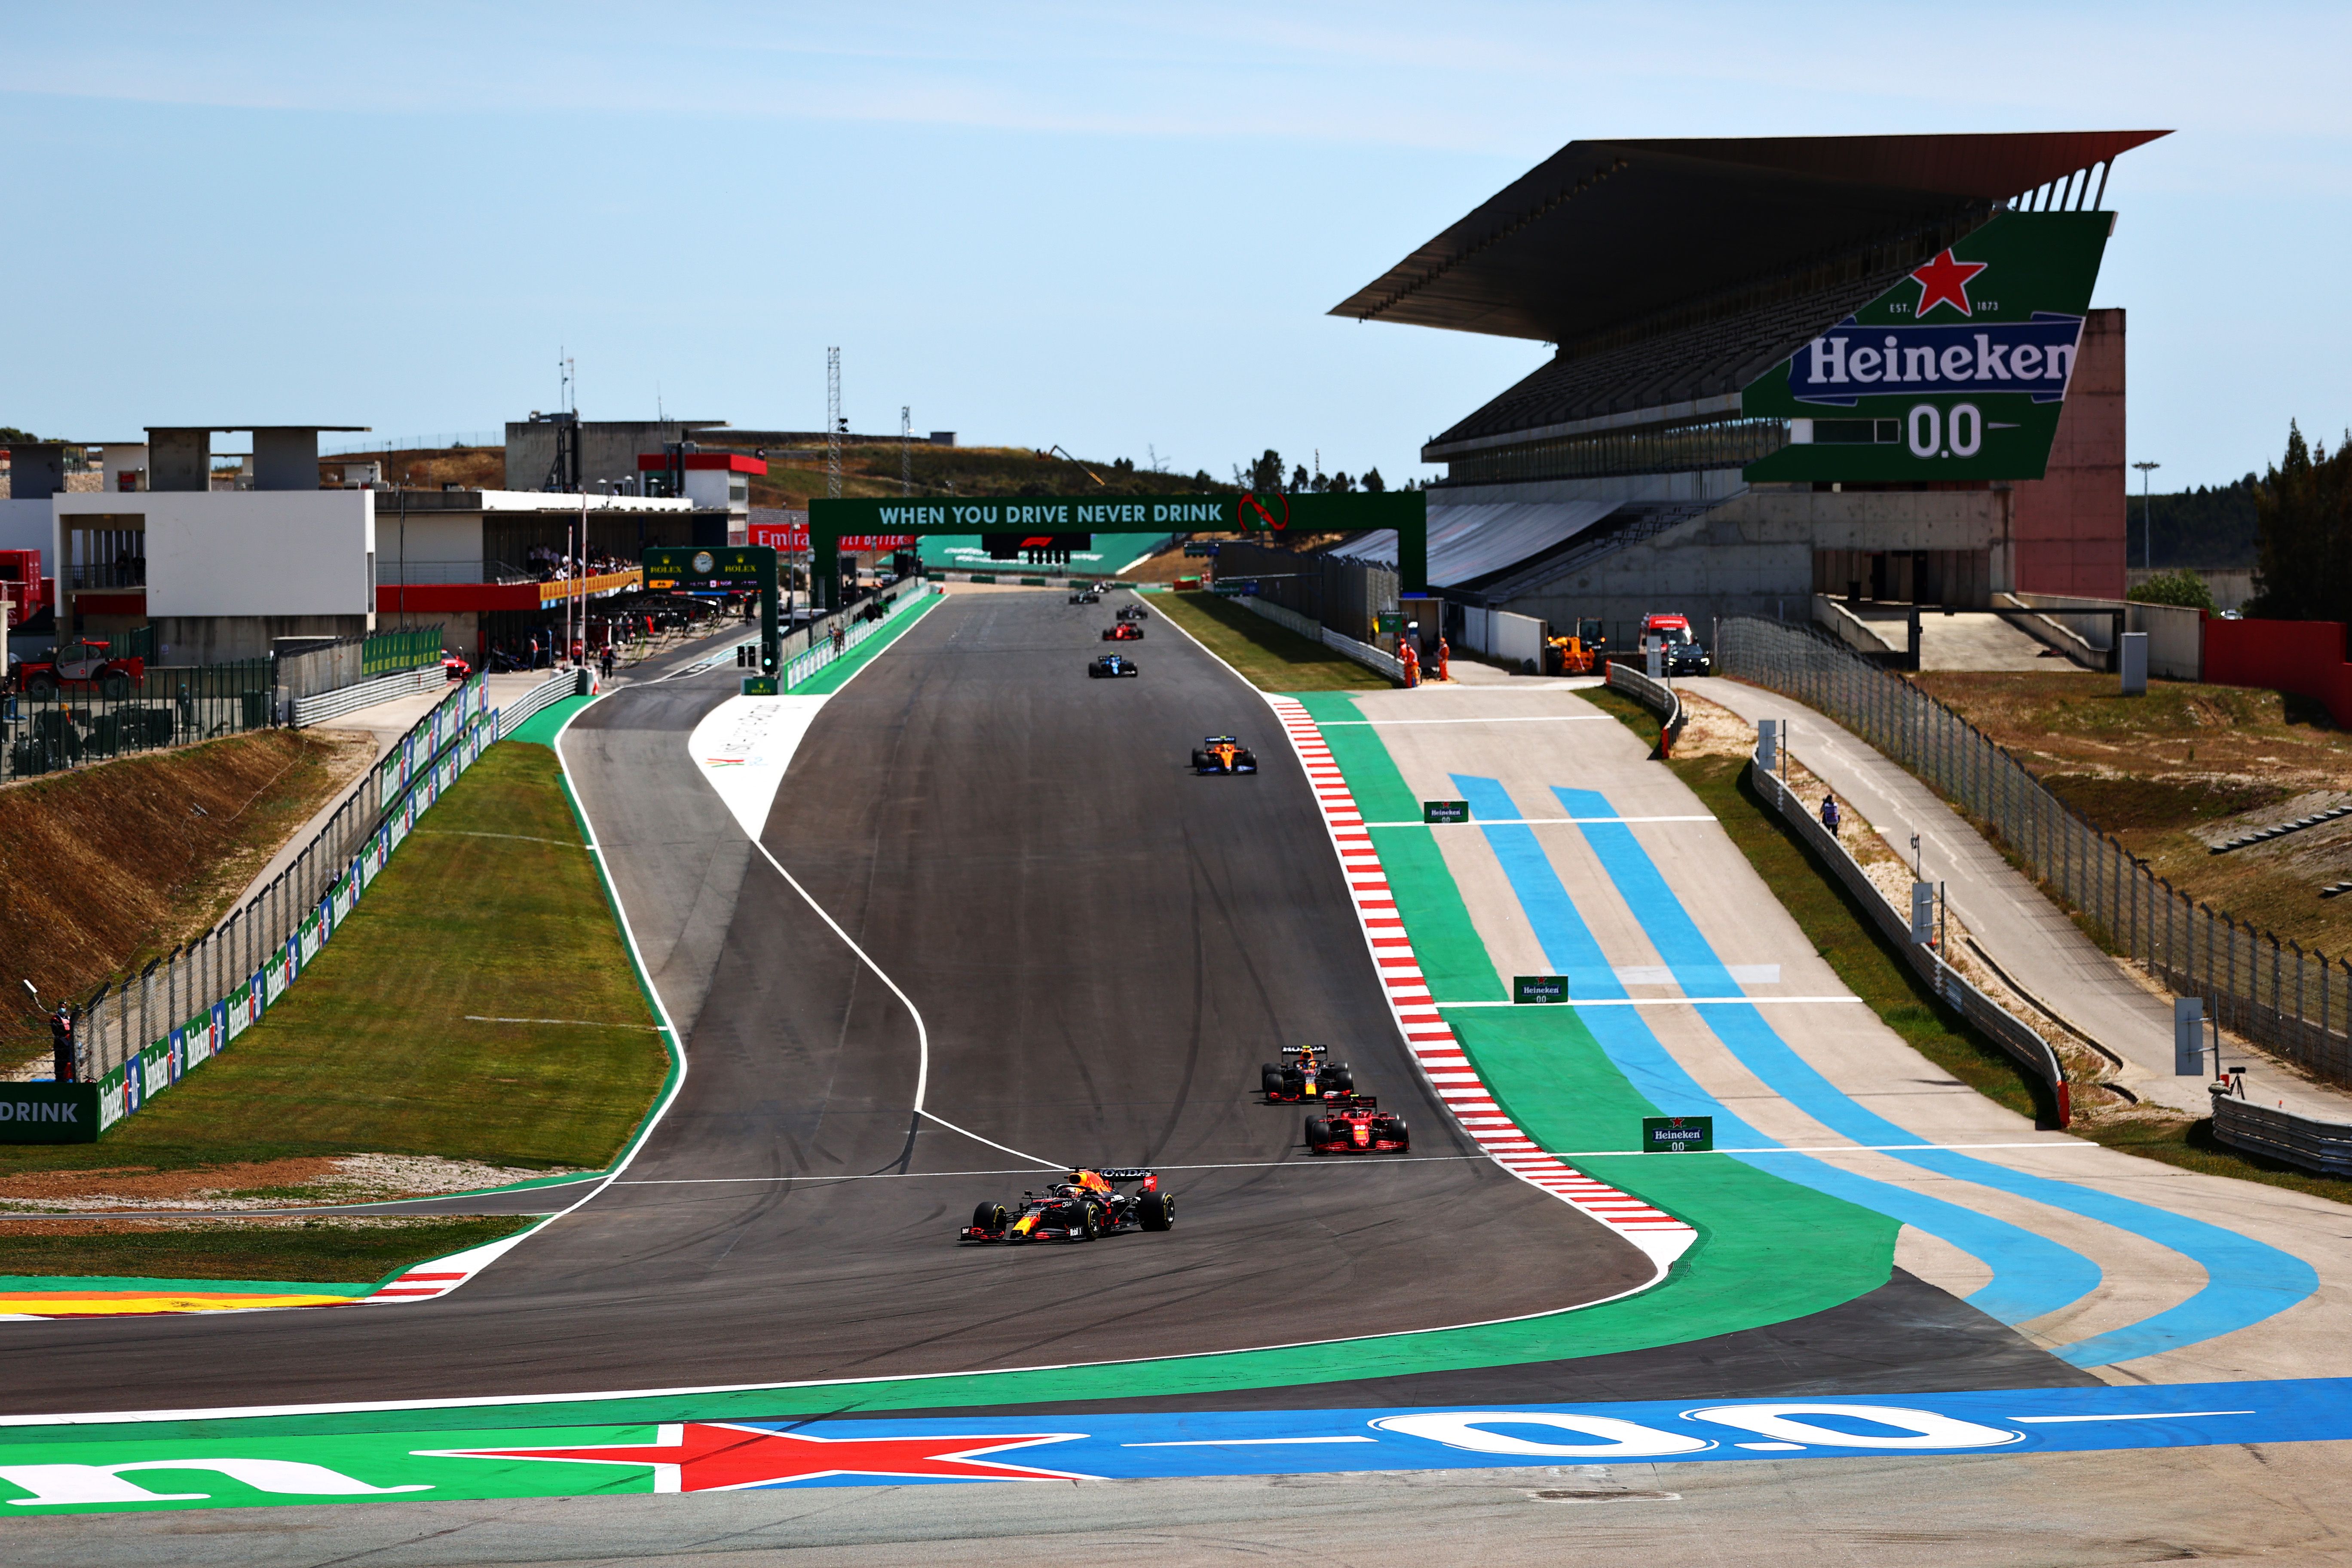 The Best Formula 1 Circuits - Top F1 Tracks Past and Present